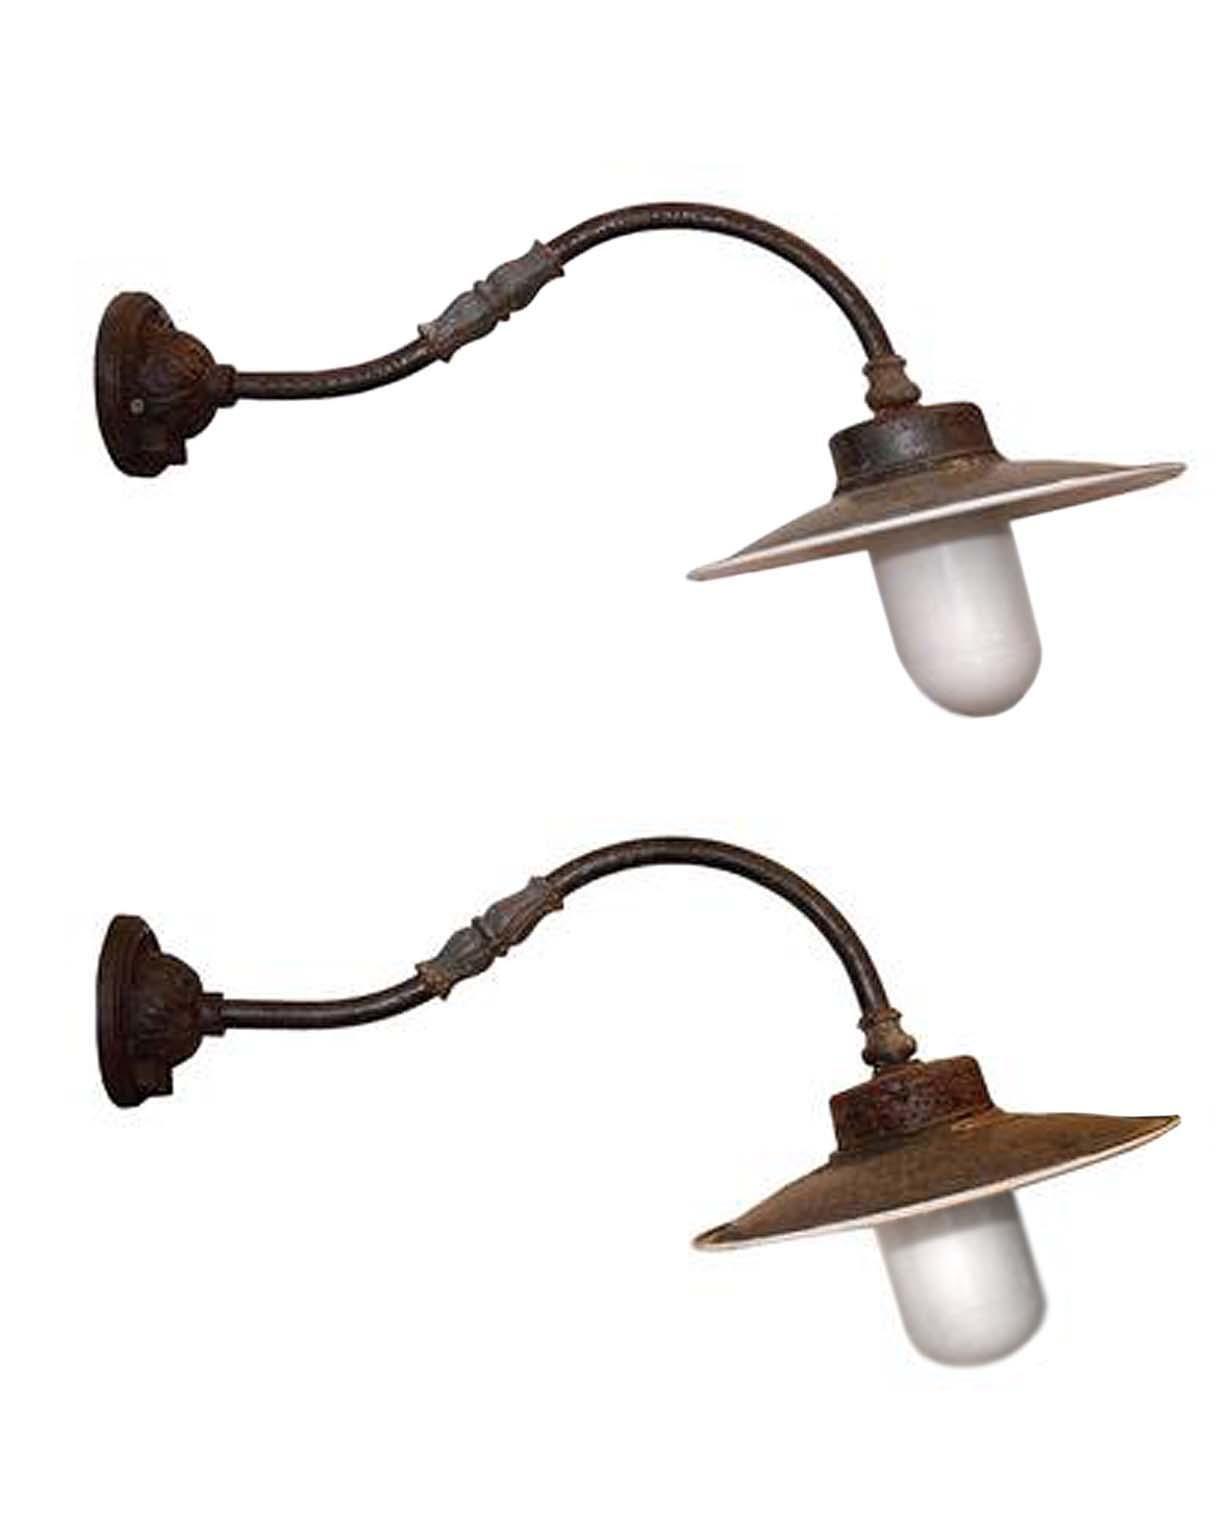 This is a pair of original antique goose neck sconces. The glass is original and they have been rewired. They are stunning. The hoods are porcelain on the underside and the measurements listed are from the wall out. They are made from cast iron,